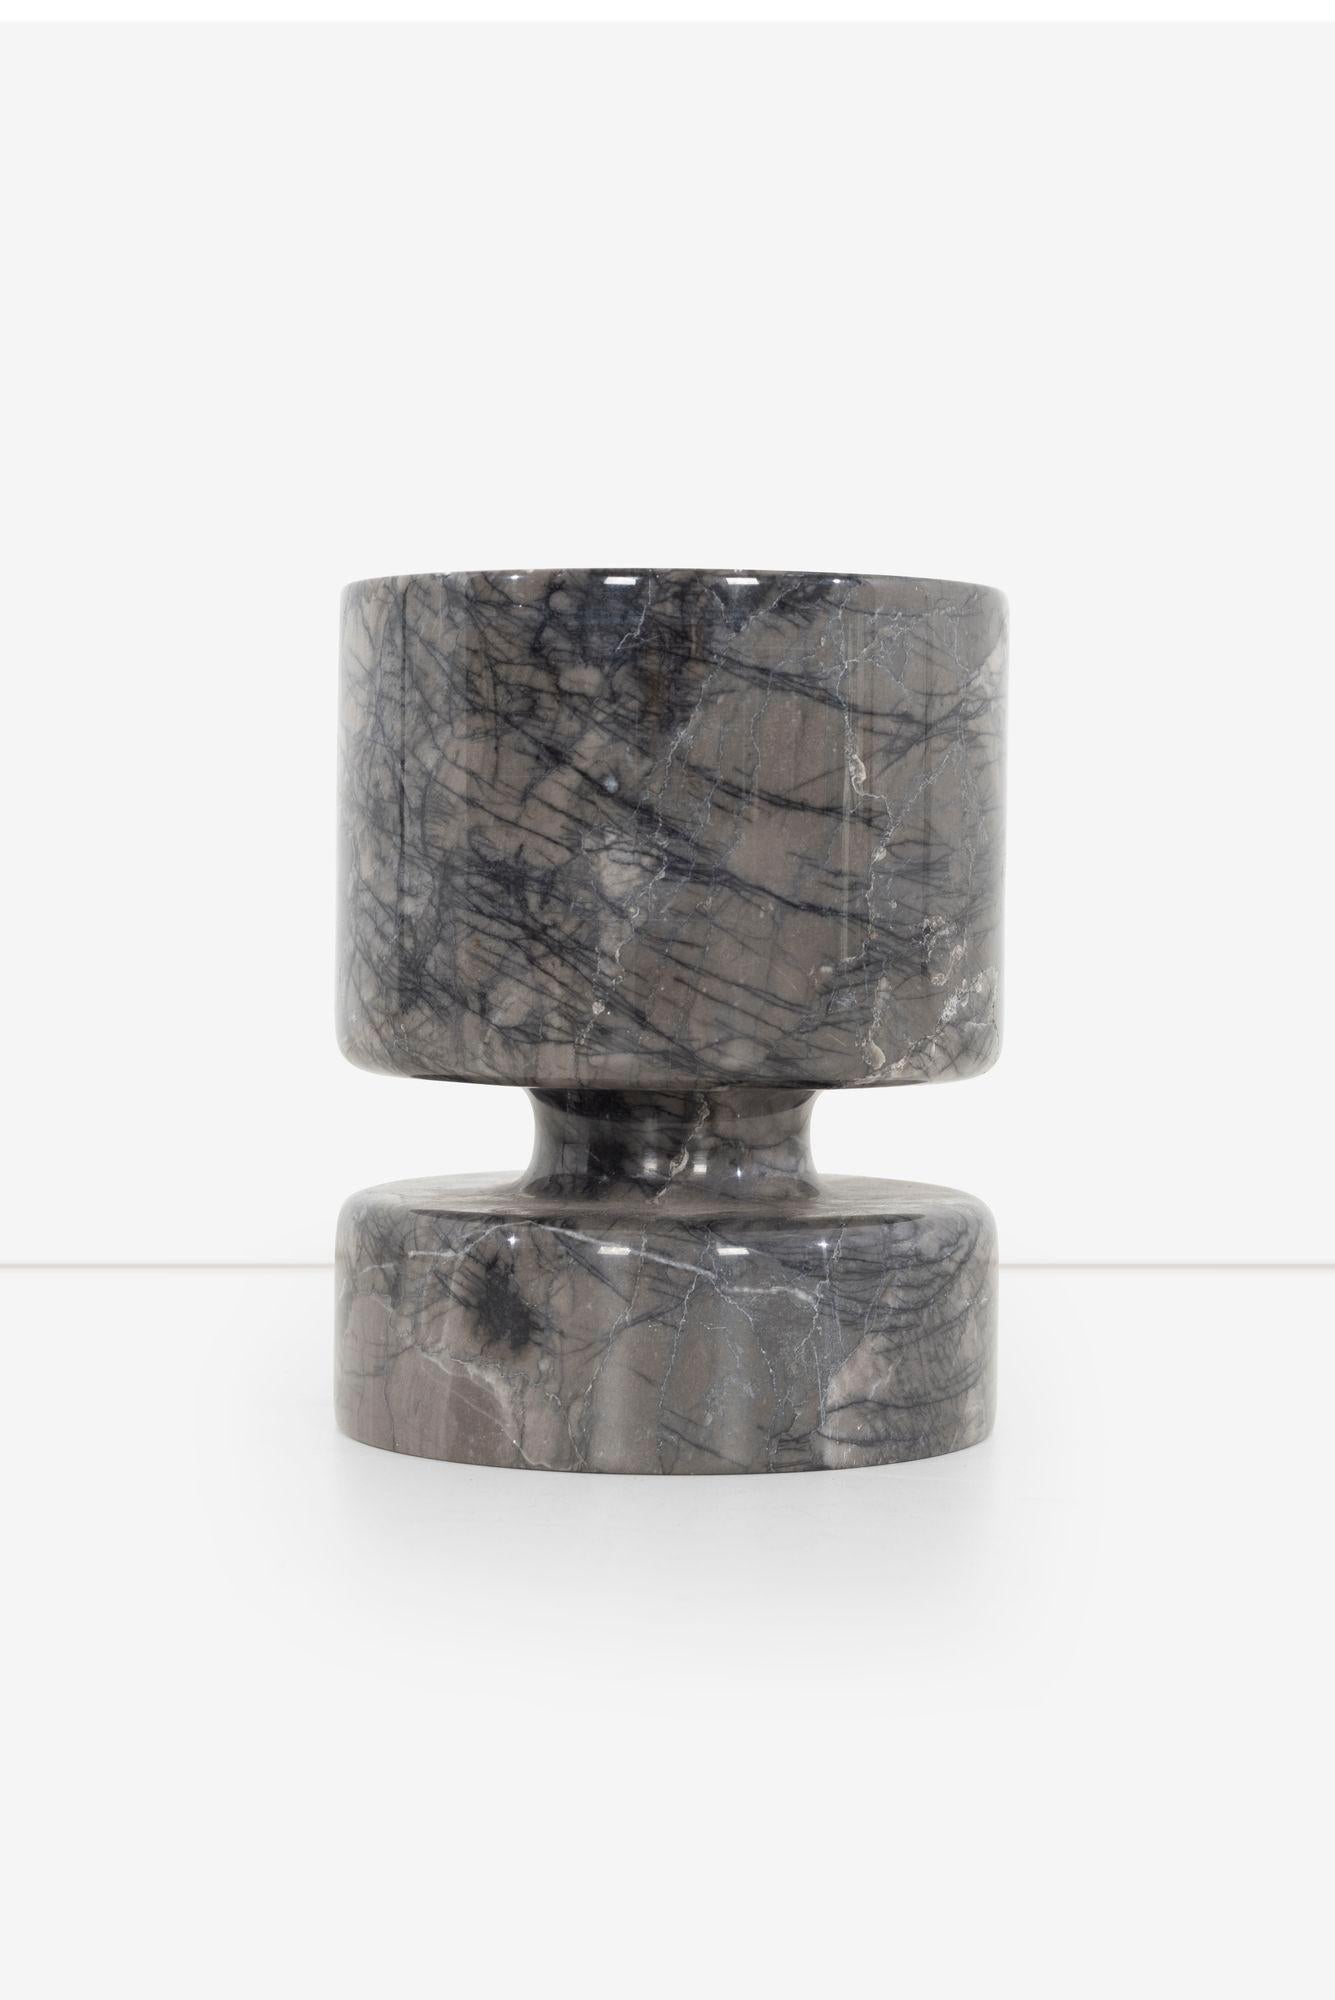 Angelo Mangiarotti Vase for Knoll, Light Grey Marble with Dark Grey veining.
[Stamped underside Made in Italy]